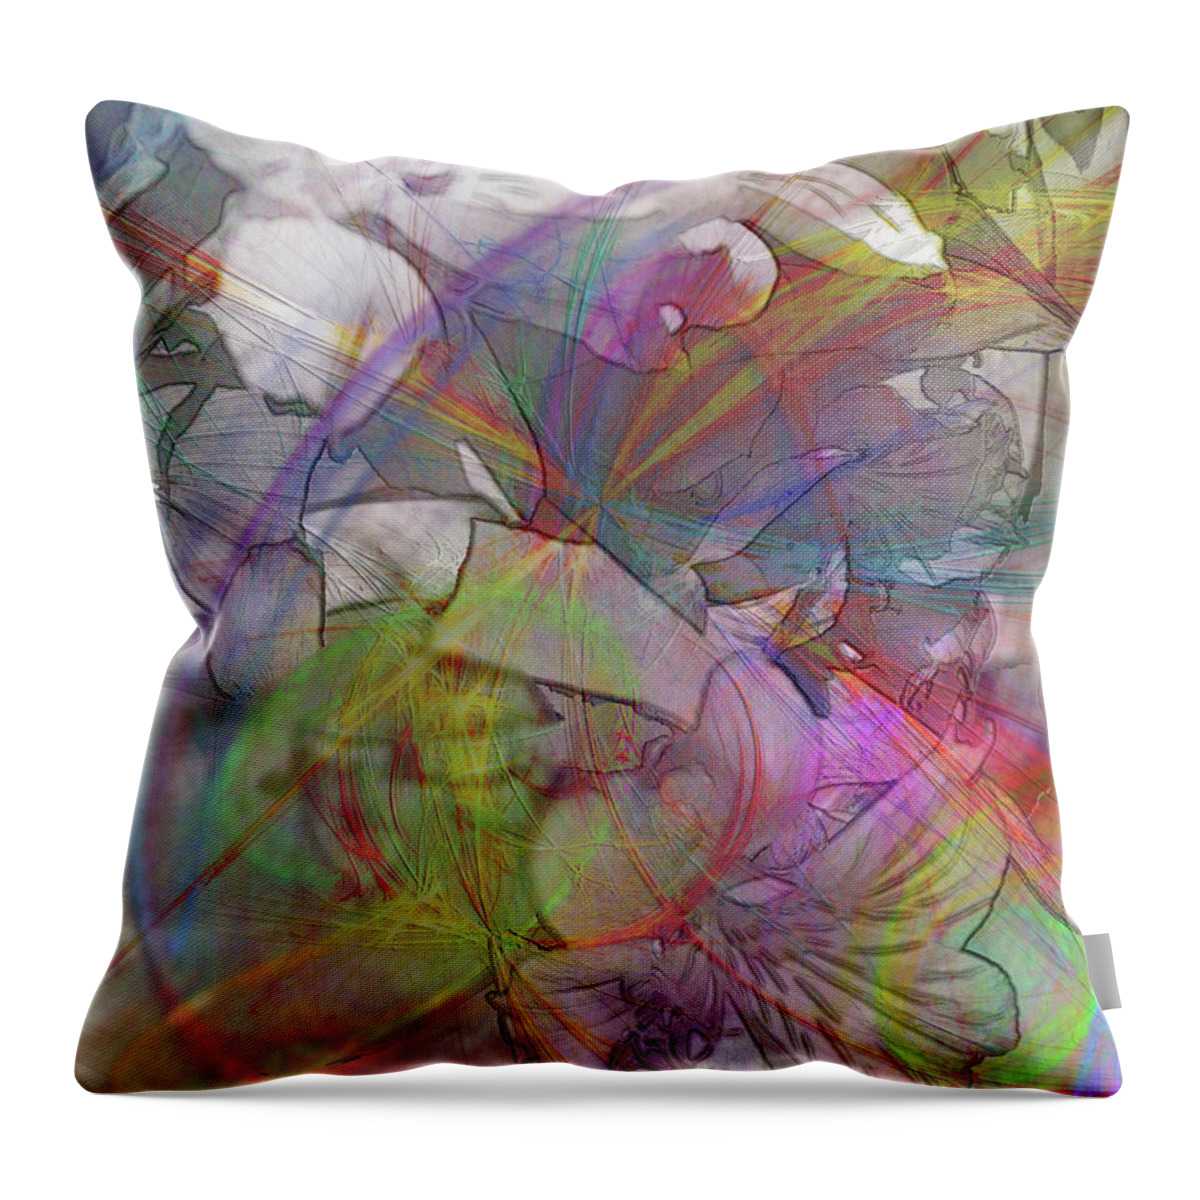 Floral Fantasy Throw Pillow featuring the digital art Floral Fantasy by Studio B Prints